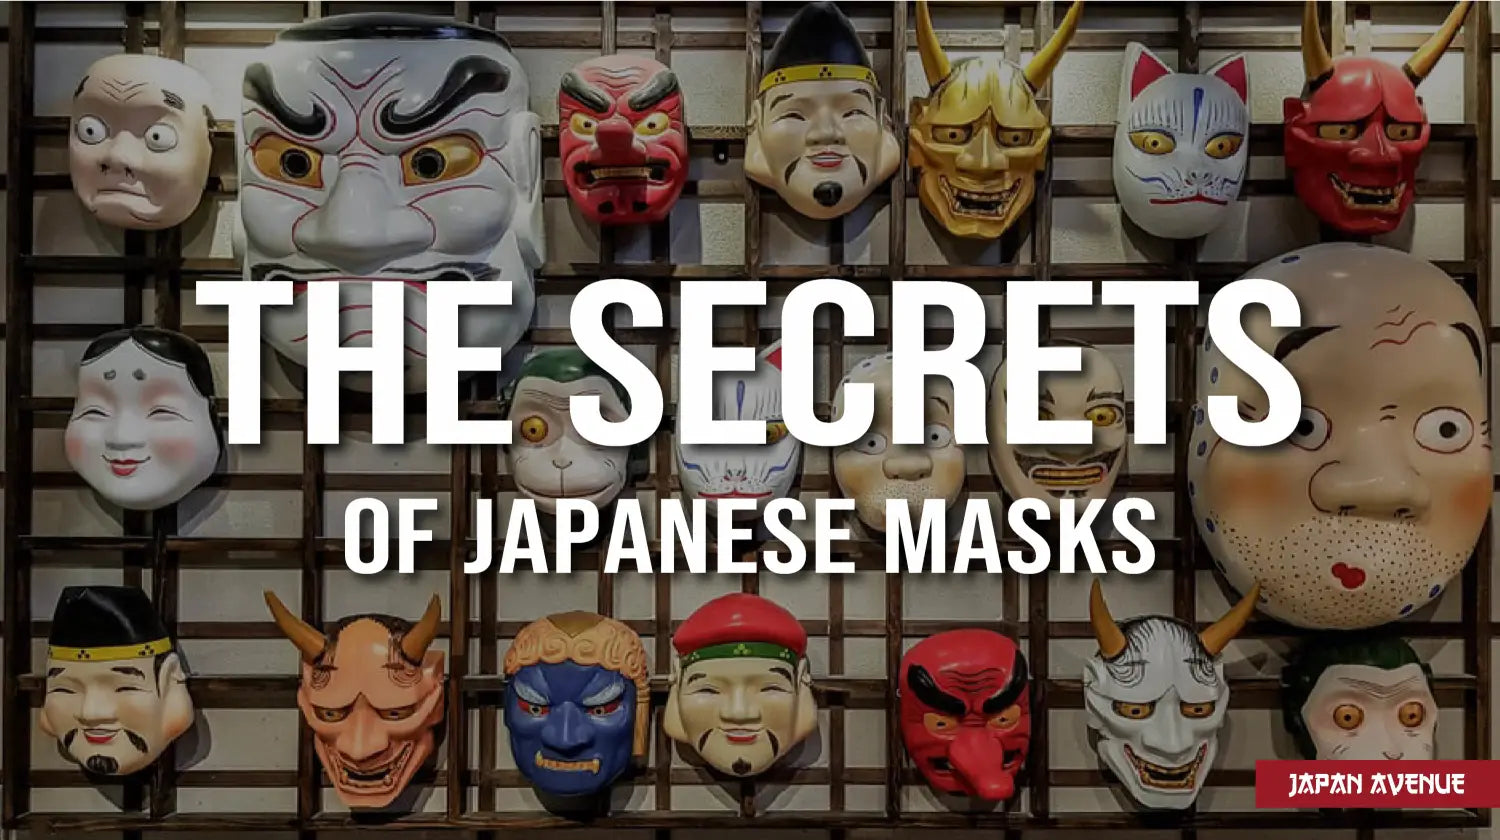 Japanese Masks and their Meaning